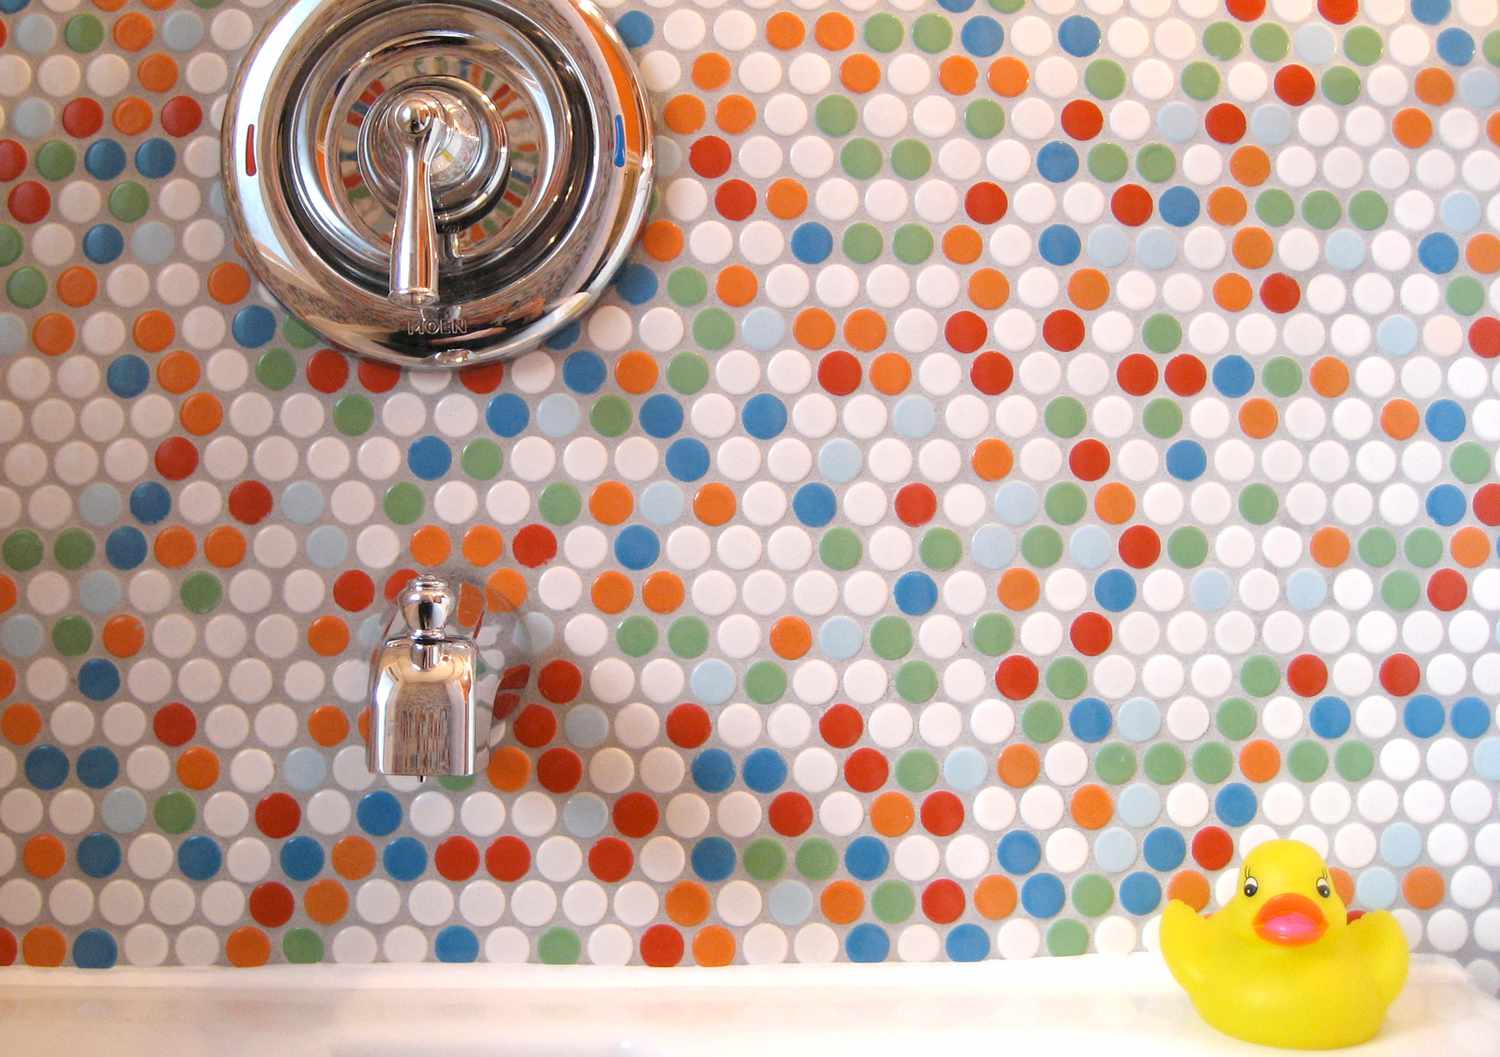 Round rainbow tile on bathtub wall with a rubber duck in front